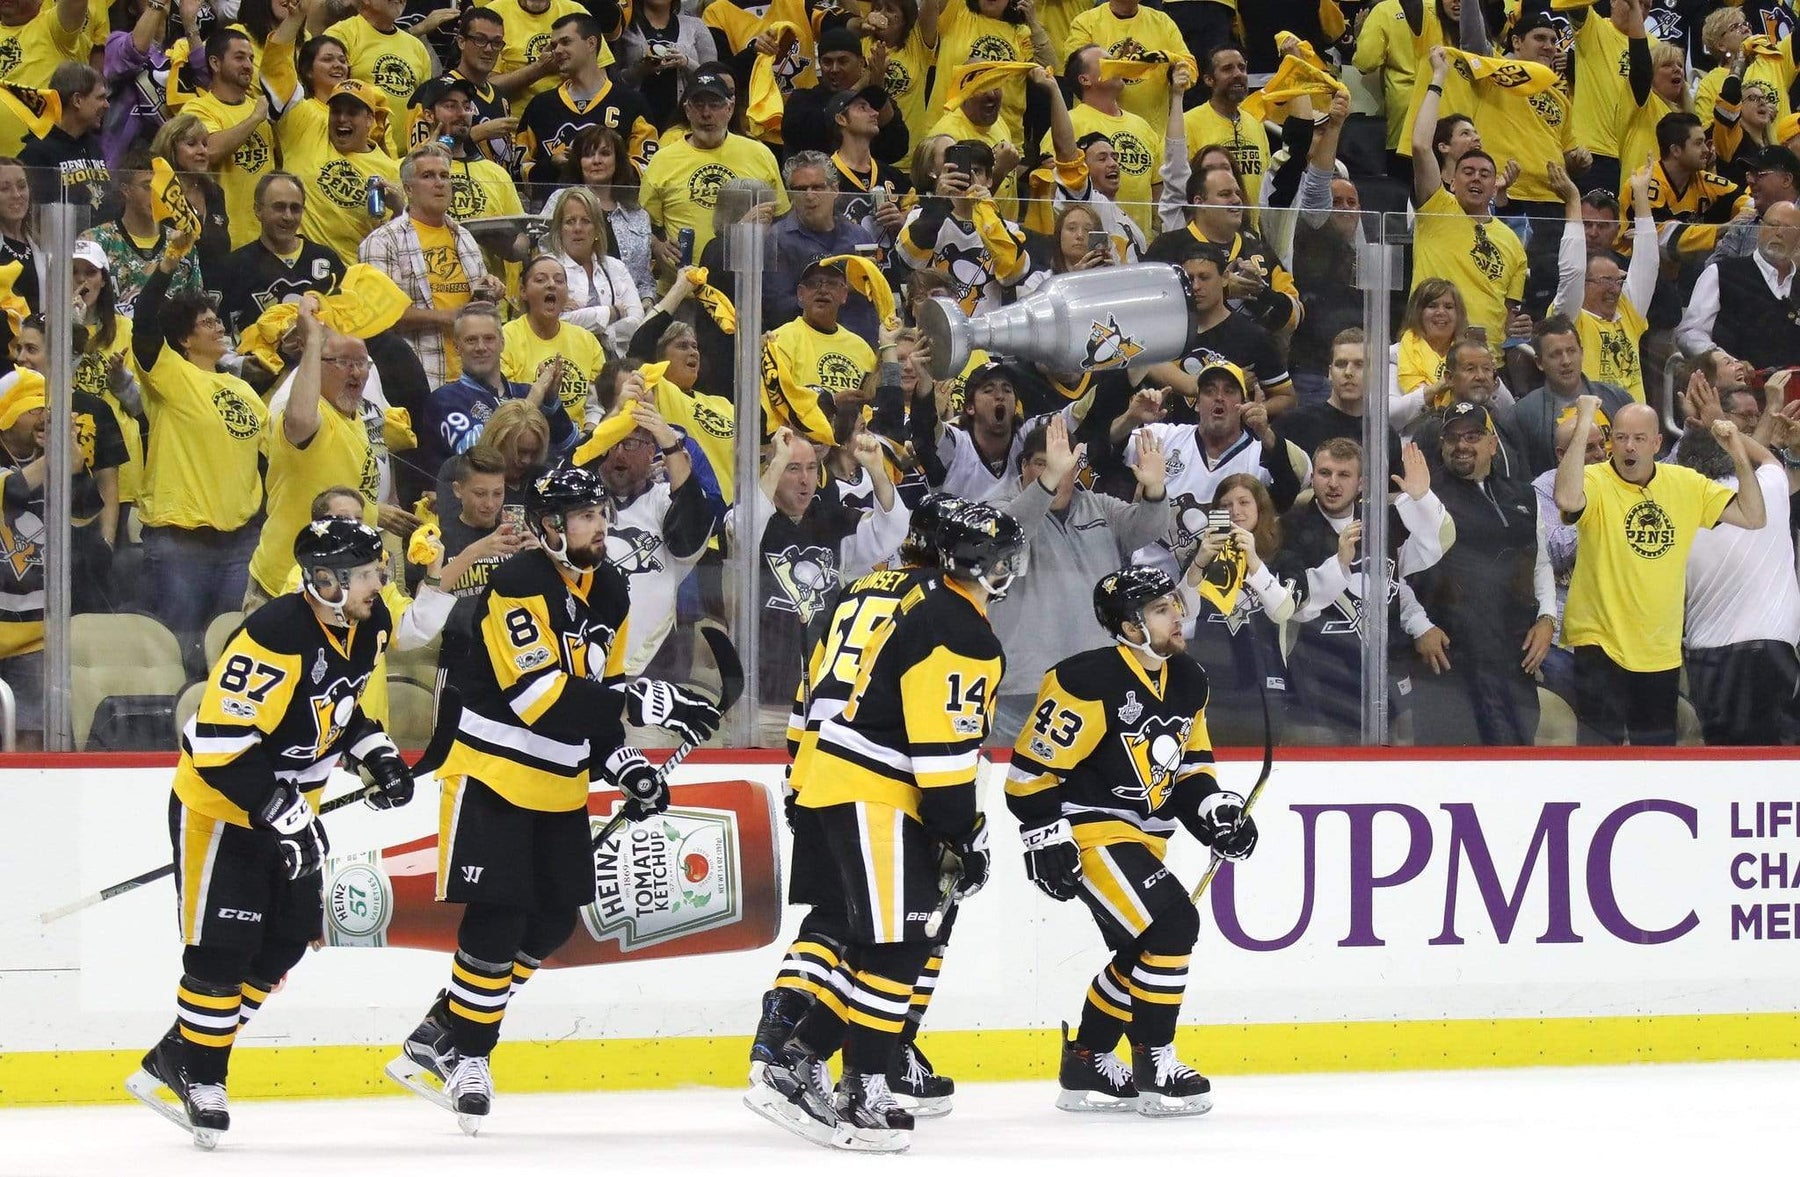 PITTSBURGH SURVIVES NASHVILLE COMEBACK TO WIN GAME 1